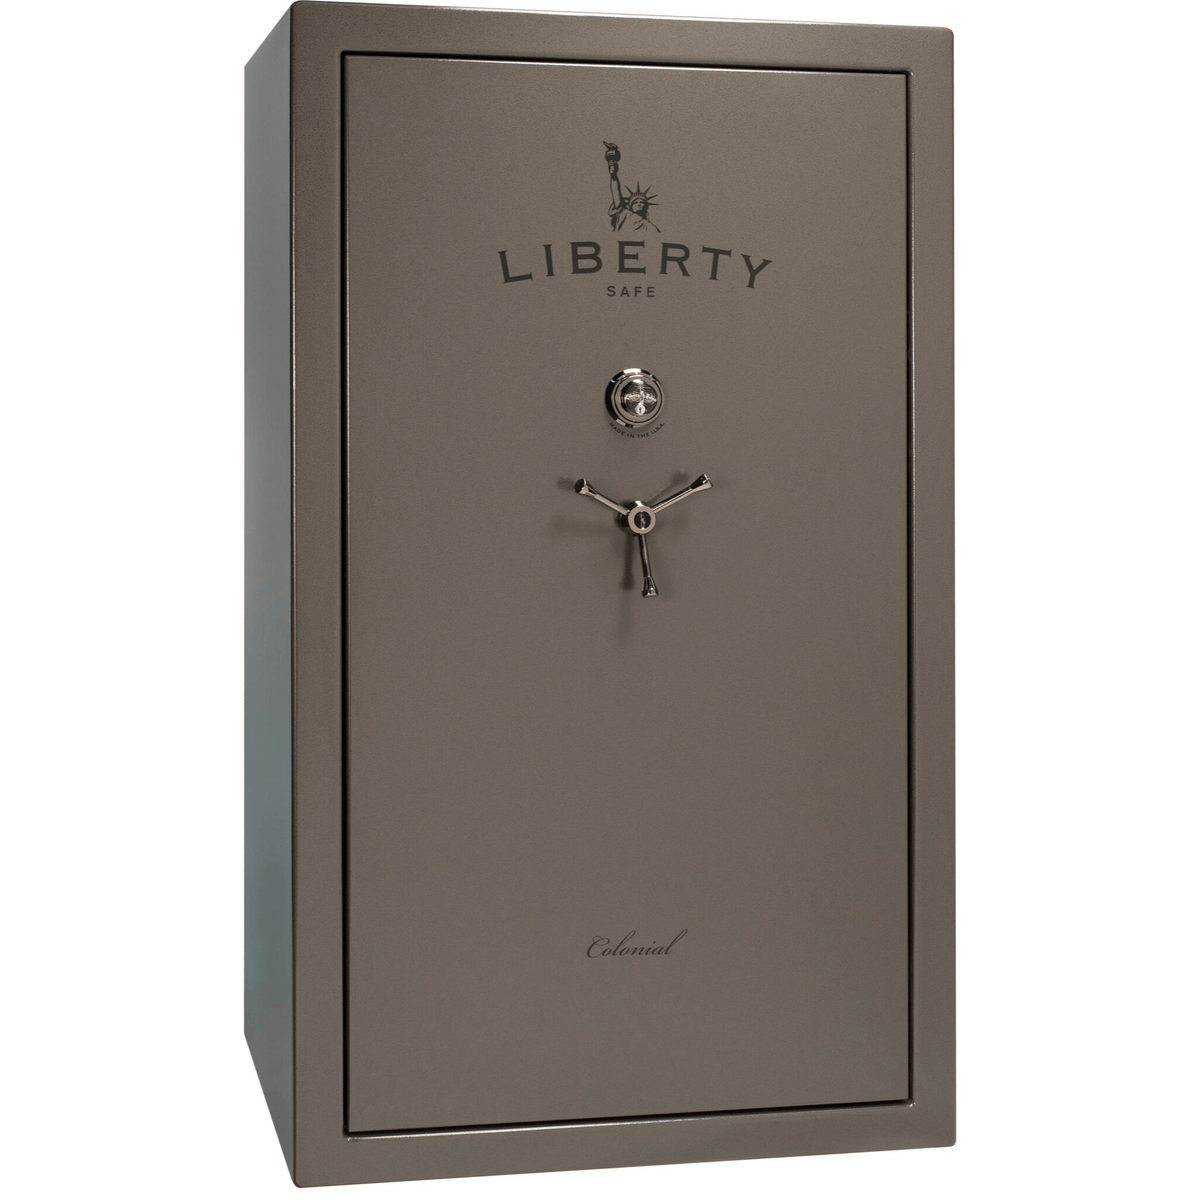 Liberty Colonial 50 Safe in Gray Marble with Black Chrome Mechanical Lock.